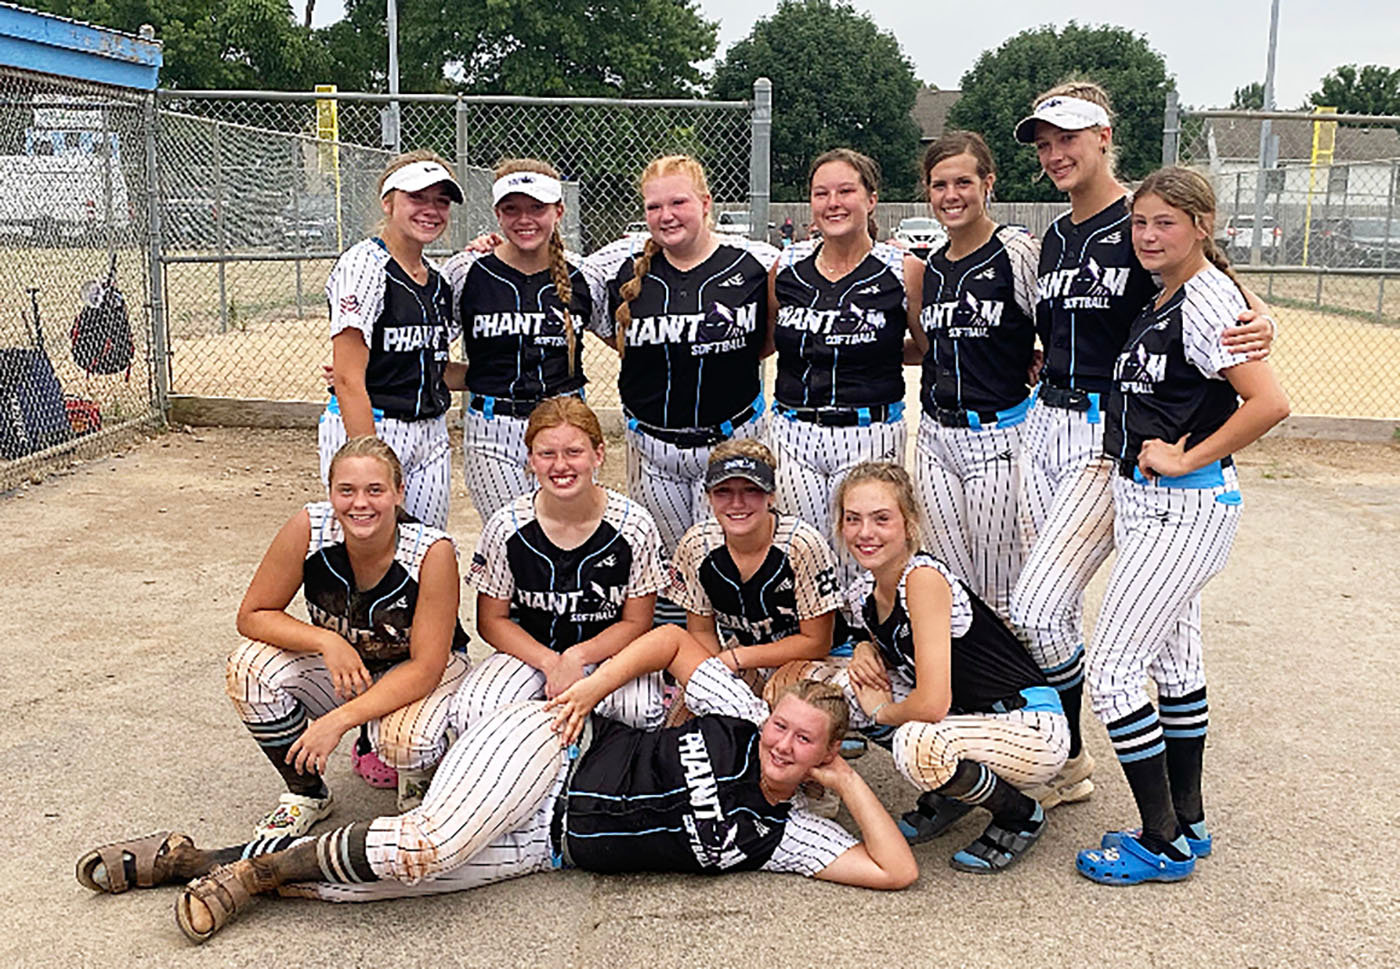 The Phantom travel softball team based in Moberly compiled a record of 29-20-2 over the course of the spring and summer. Here’s the team. Front row, Taylor Martin. Second row (from left), Jordan Pasbrig, Katie Kottman, Macy White and Chloe O’Donnell. Back row, Abbie Smothers, Lauren Shirk, Maddison Taylor, Jade Mickle, Kennedy Messer, Chloe Ferguson and Elizabeth Reisenauer. Madyson Klostermann also played for Phantom; but she isn’t photographed.